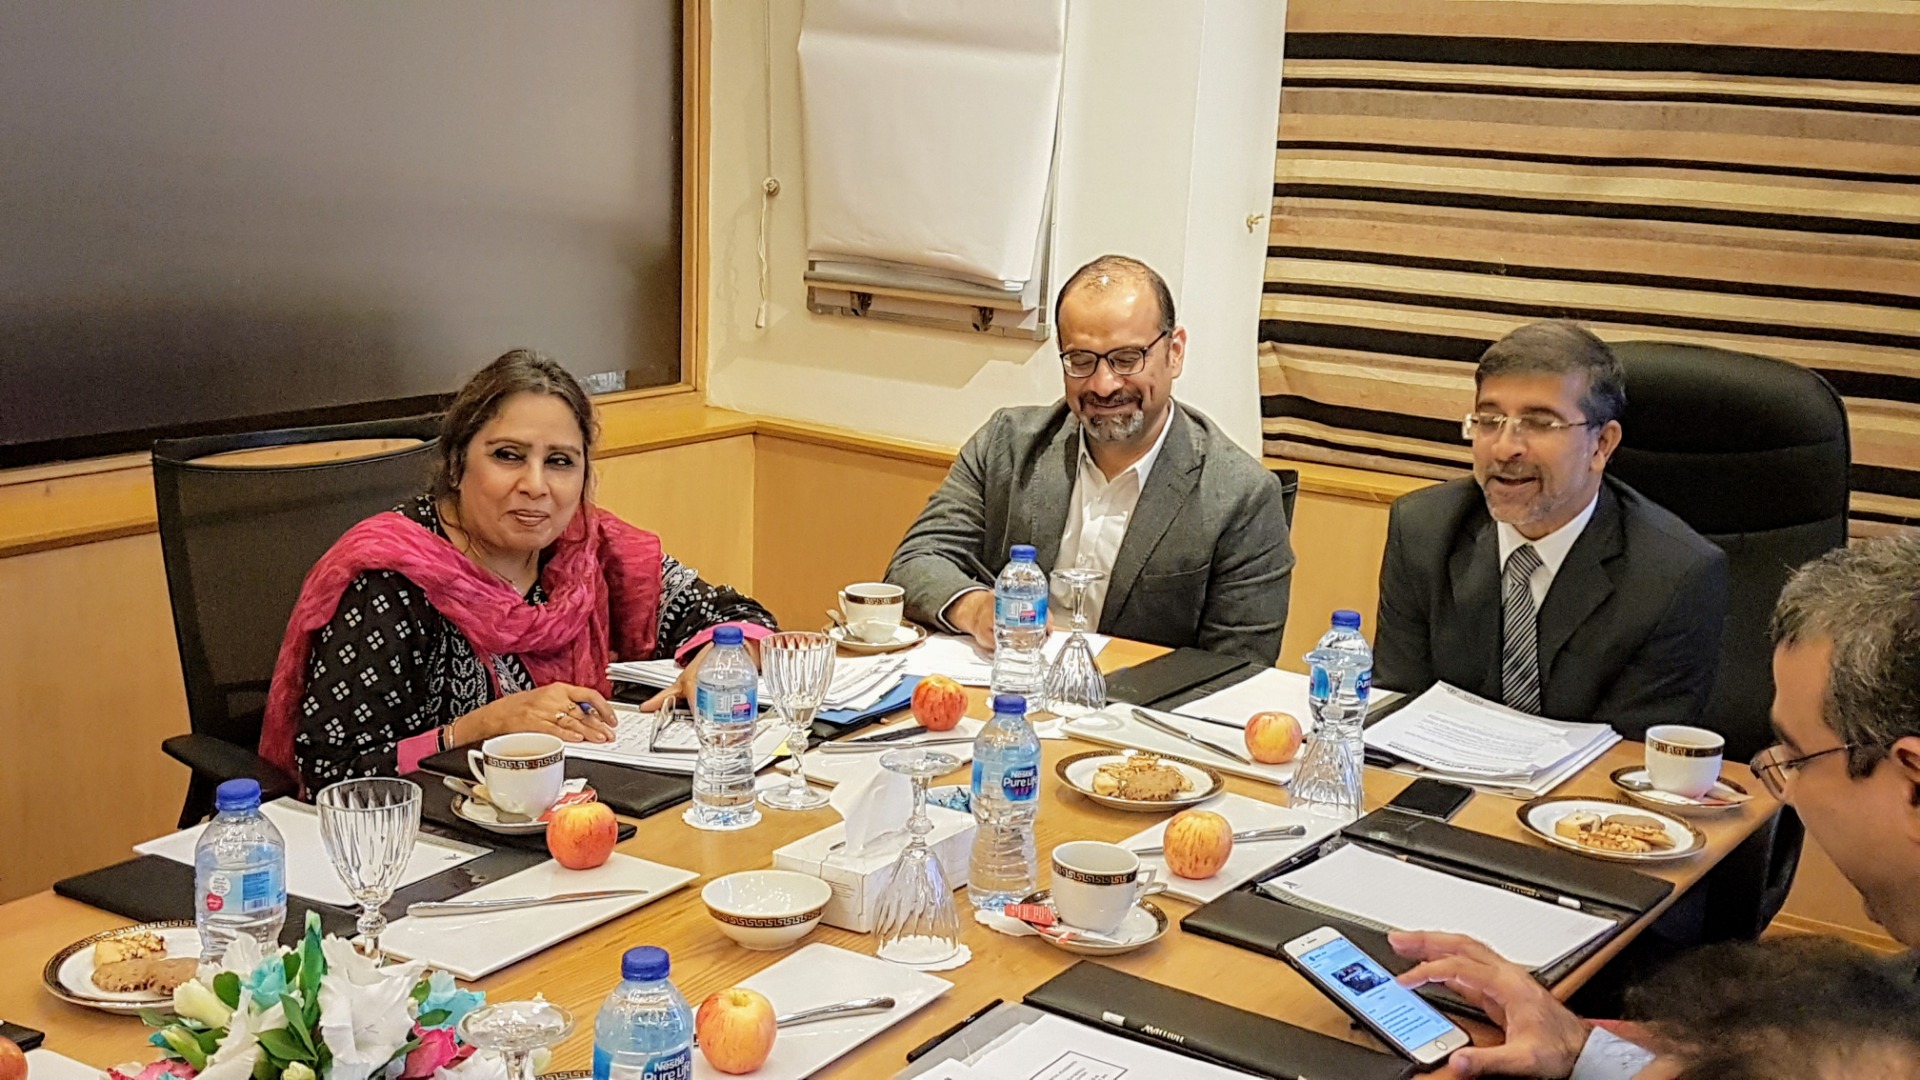 The 55th Annual General Meeting was held on 30-09-2019 at Karachi Marriott Hotel